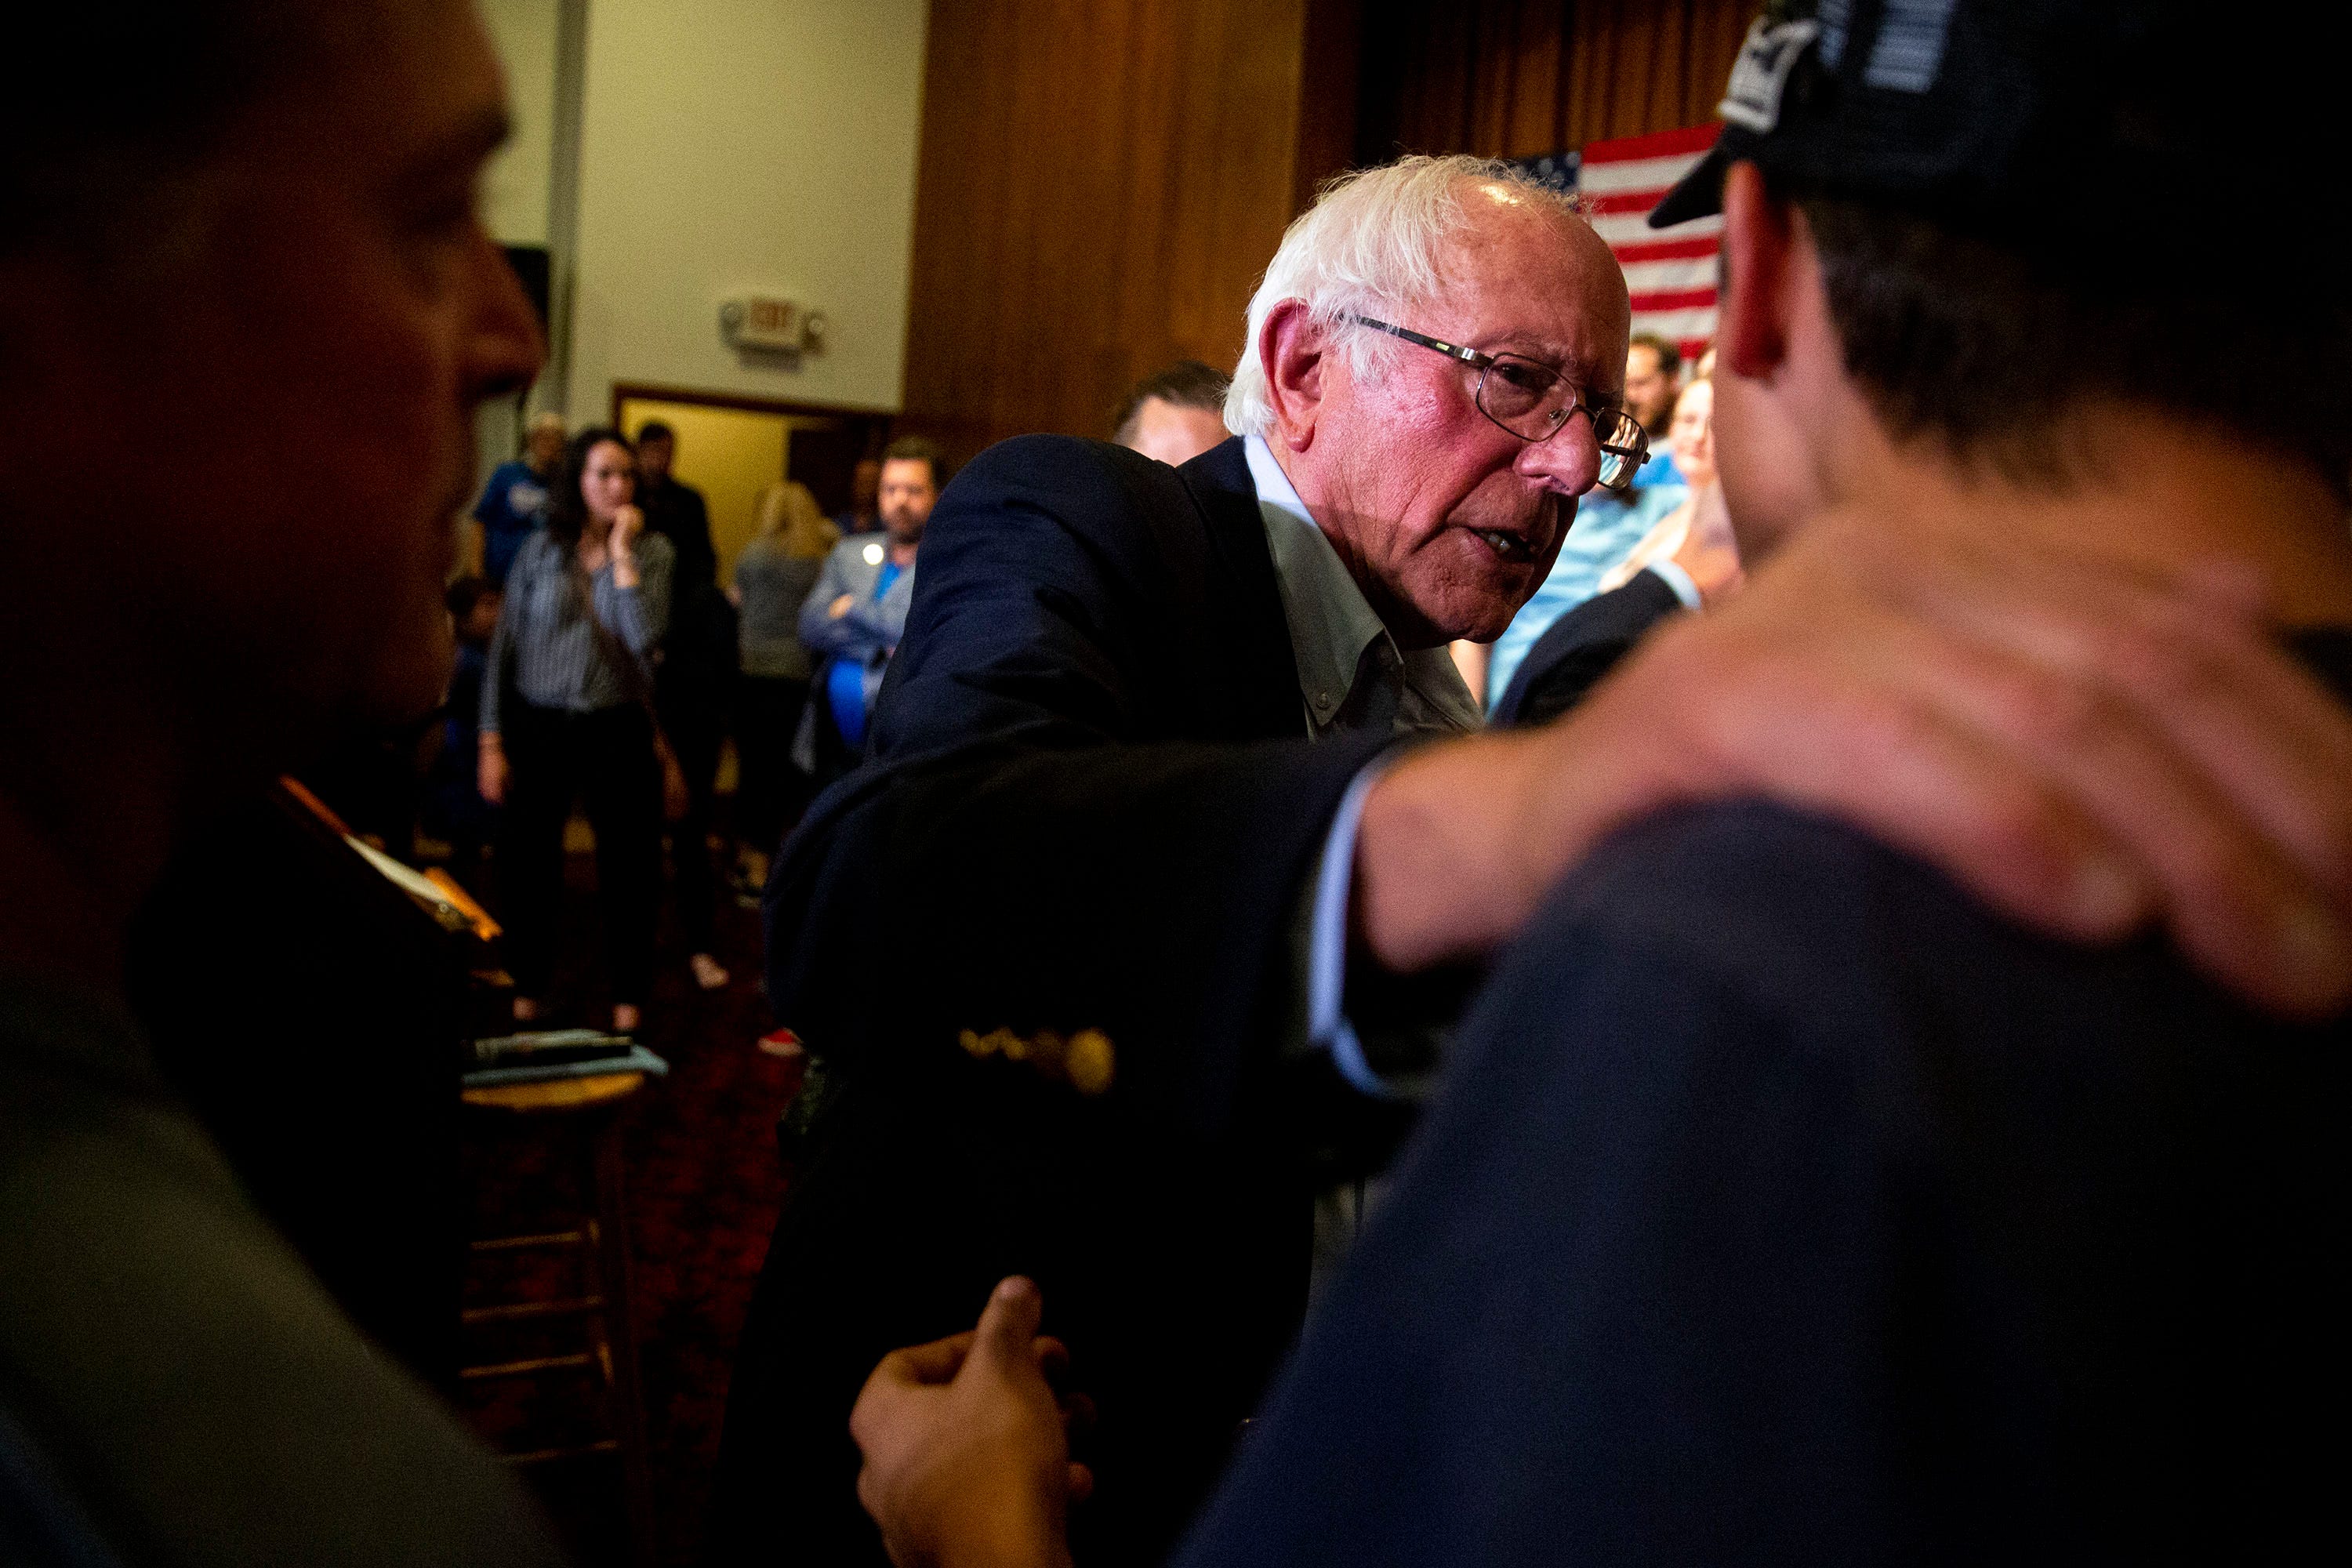 U.S. Sen. Bernie Sanders, D-Vt., talks with people in the crowd after a town hall event on Monday, Sep. 23, 2019, at the Clinton Masonic Center in Clinton.